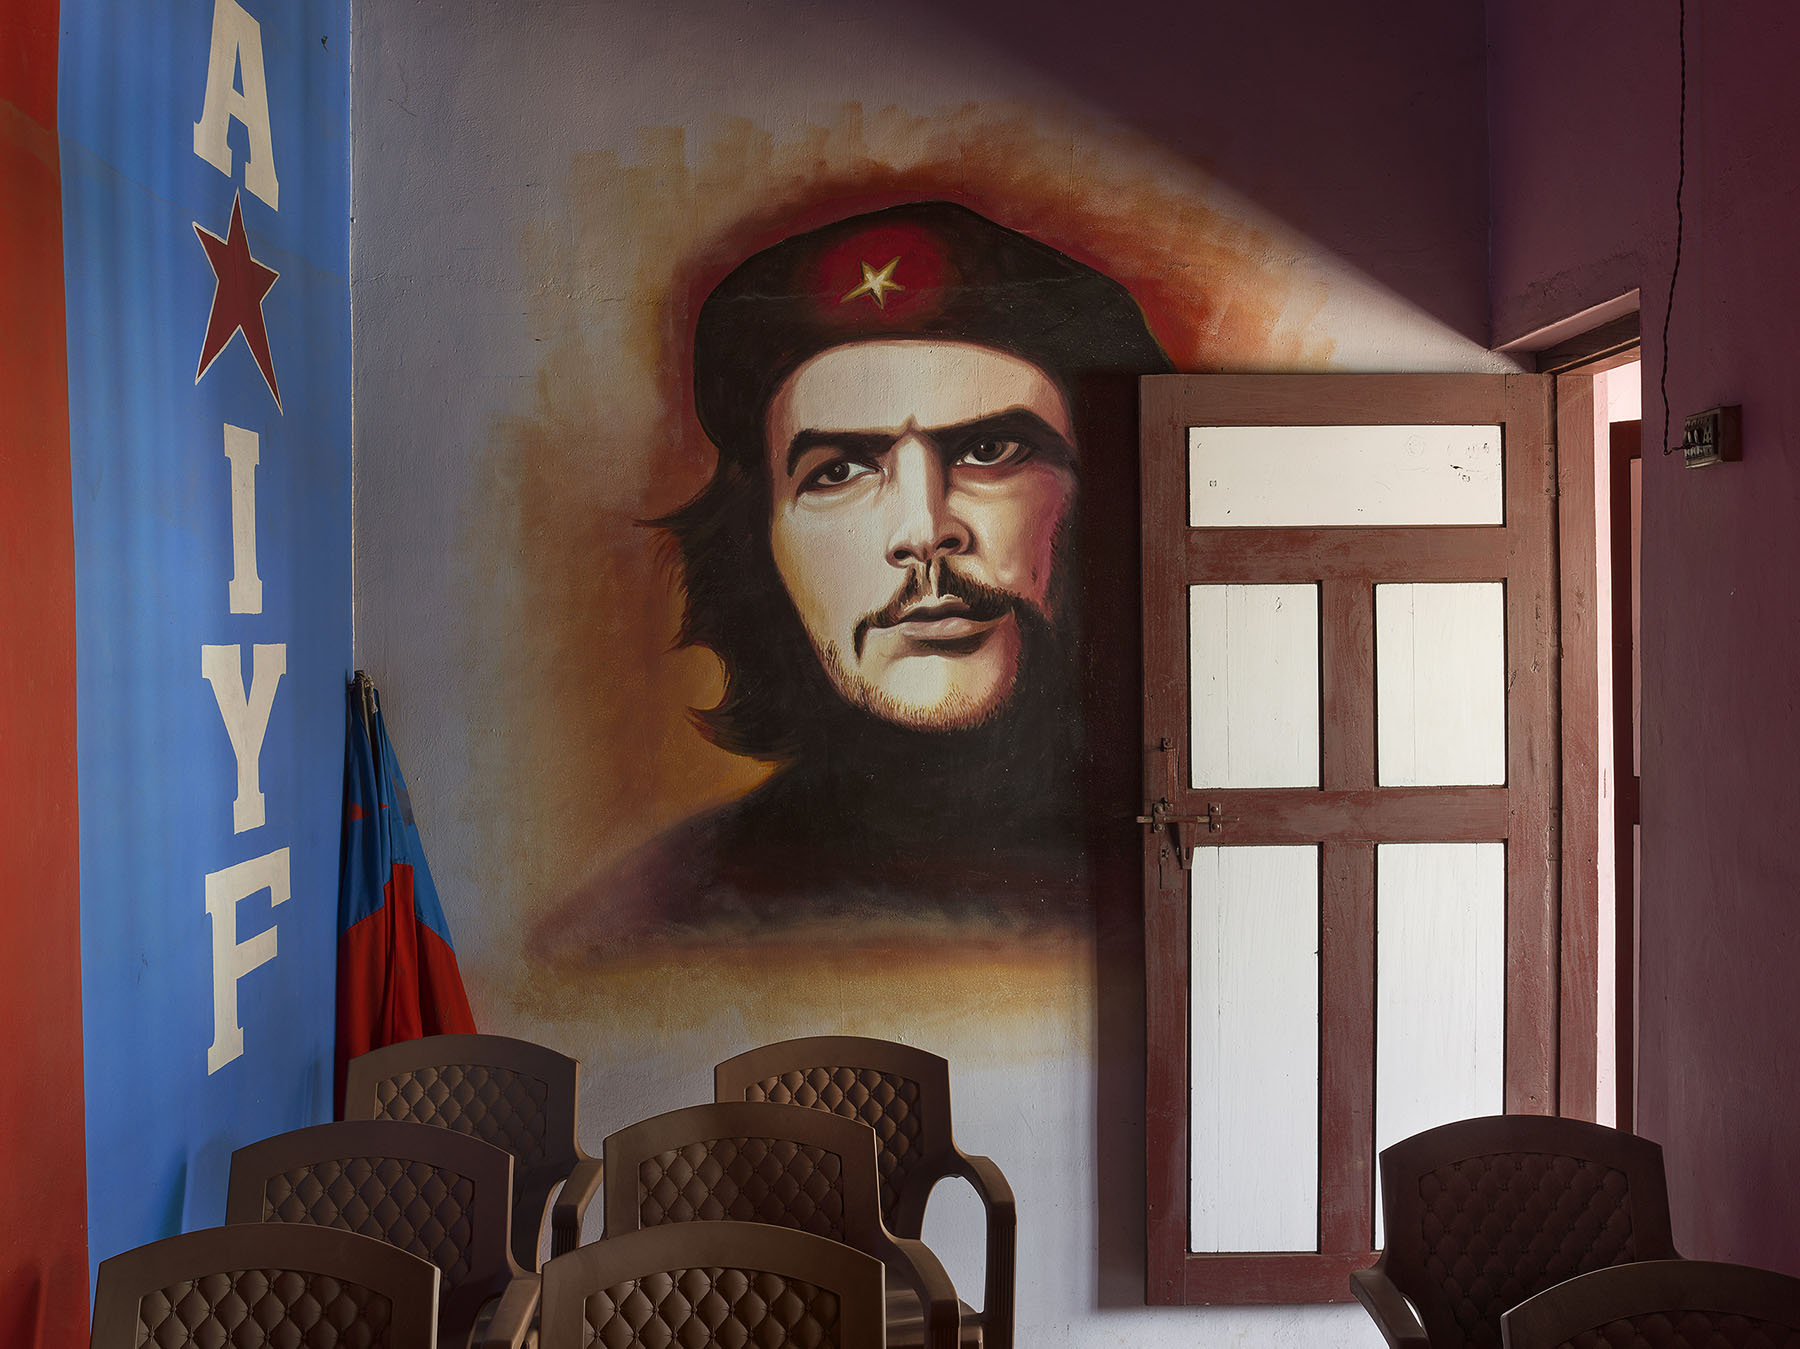 Communism in India – Kerala. Communist Party of India, aka CPI: Kondotty town branch office, Malappuram district. Che Guevara mural.
The CPI is the second largest party in the Left Democratic Front coalition which has ruled Kerala State since 2016.